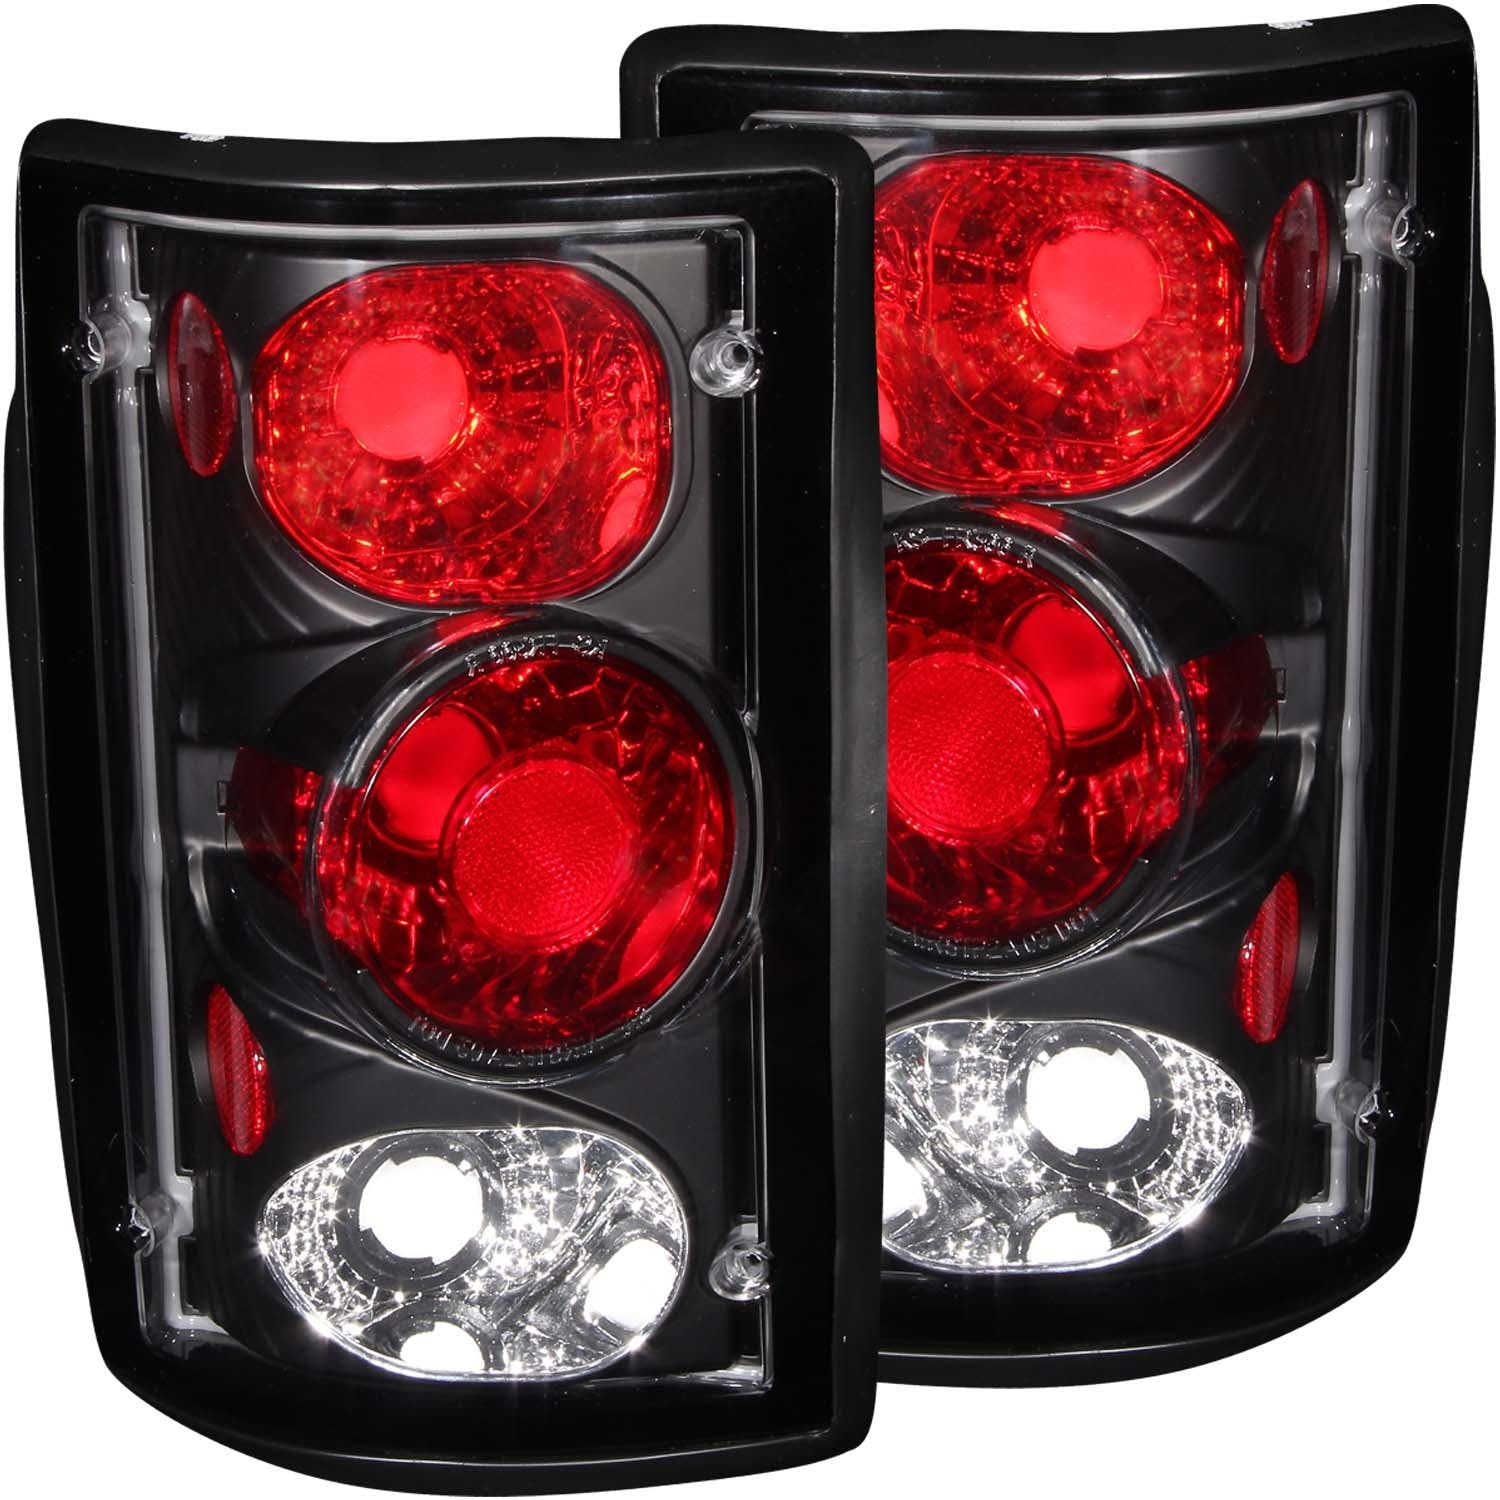 AnzoUSA 211051 Taillights Black